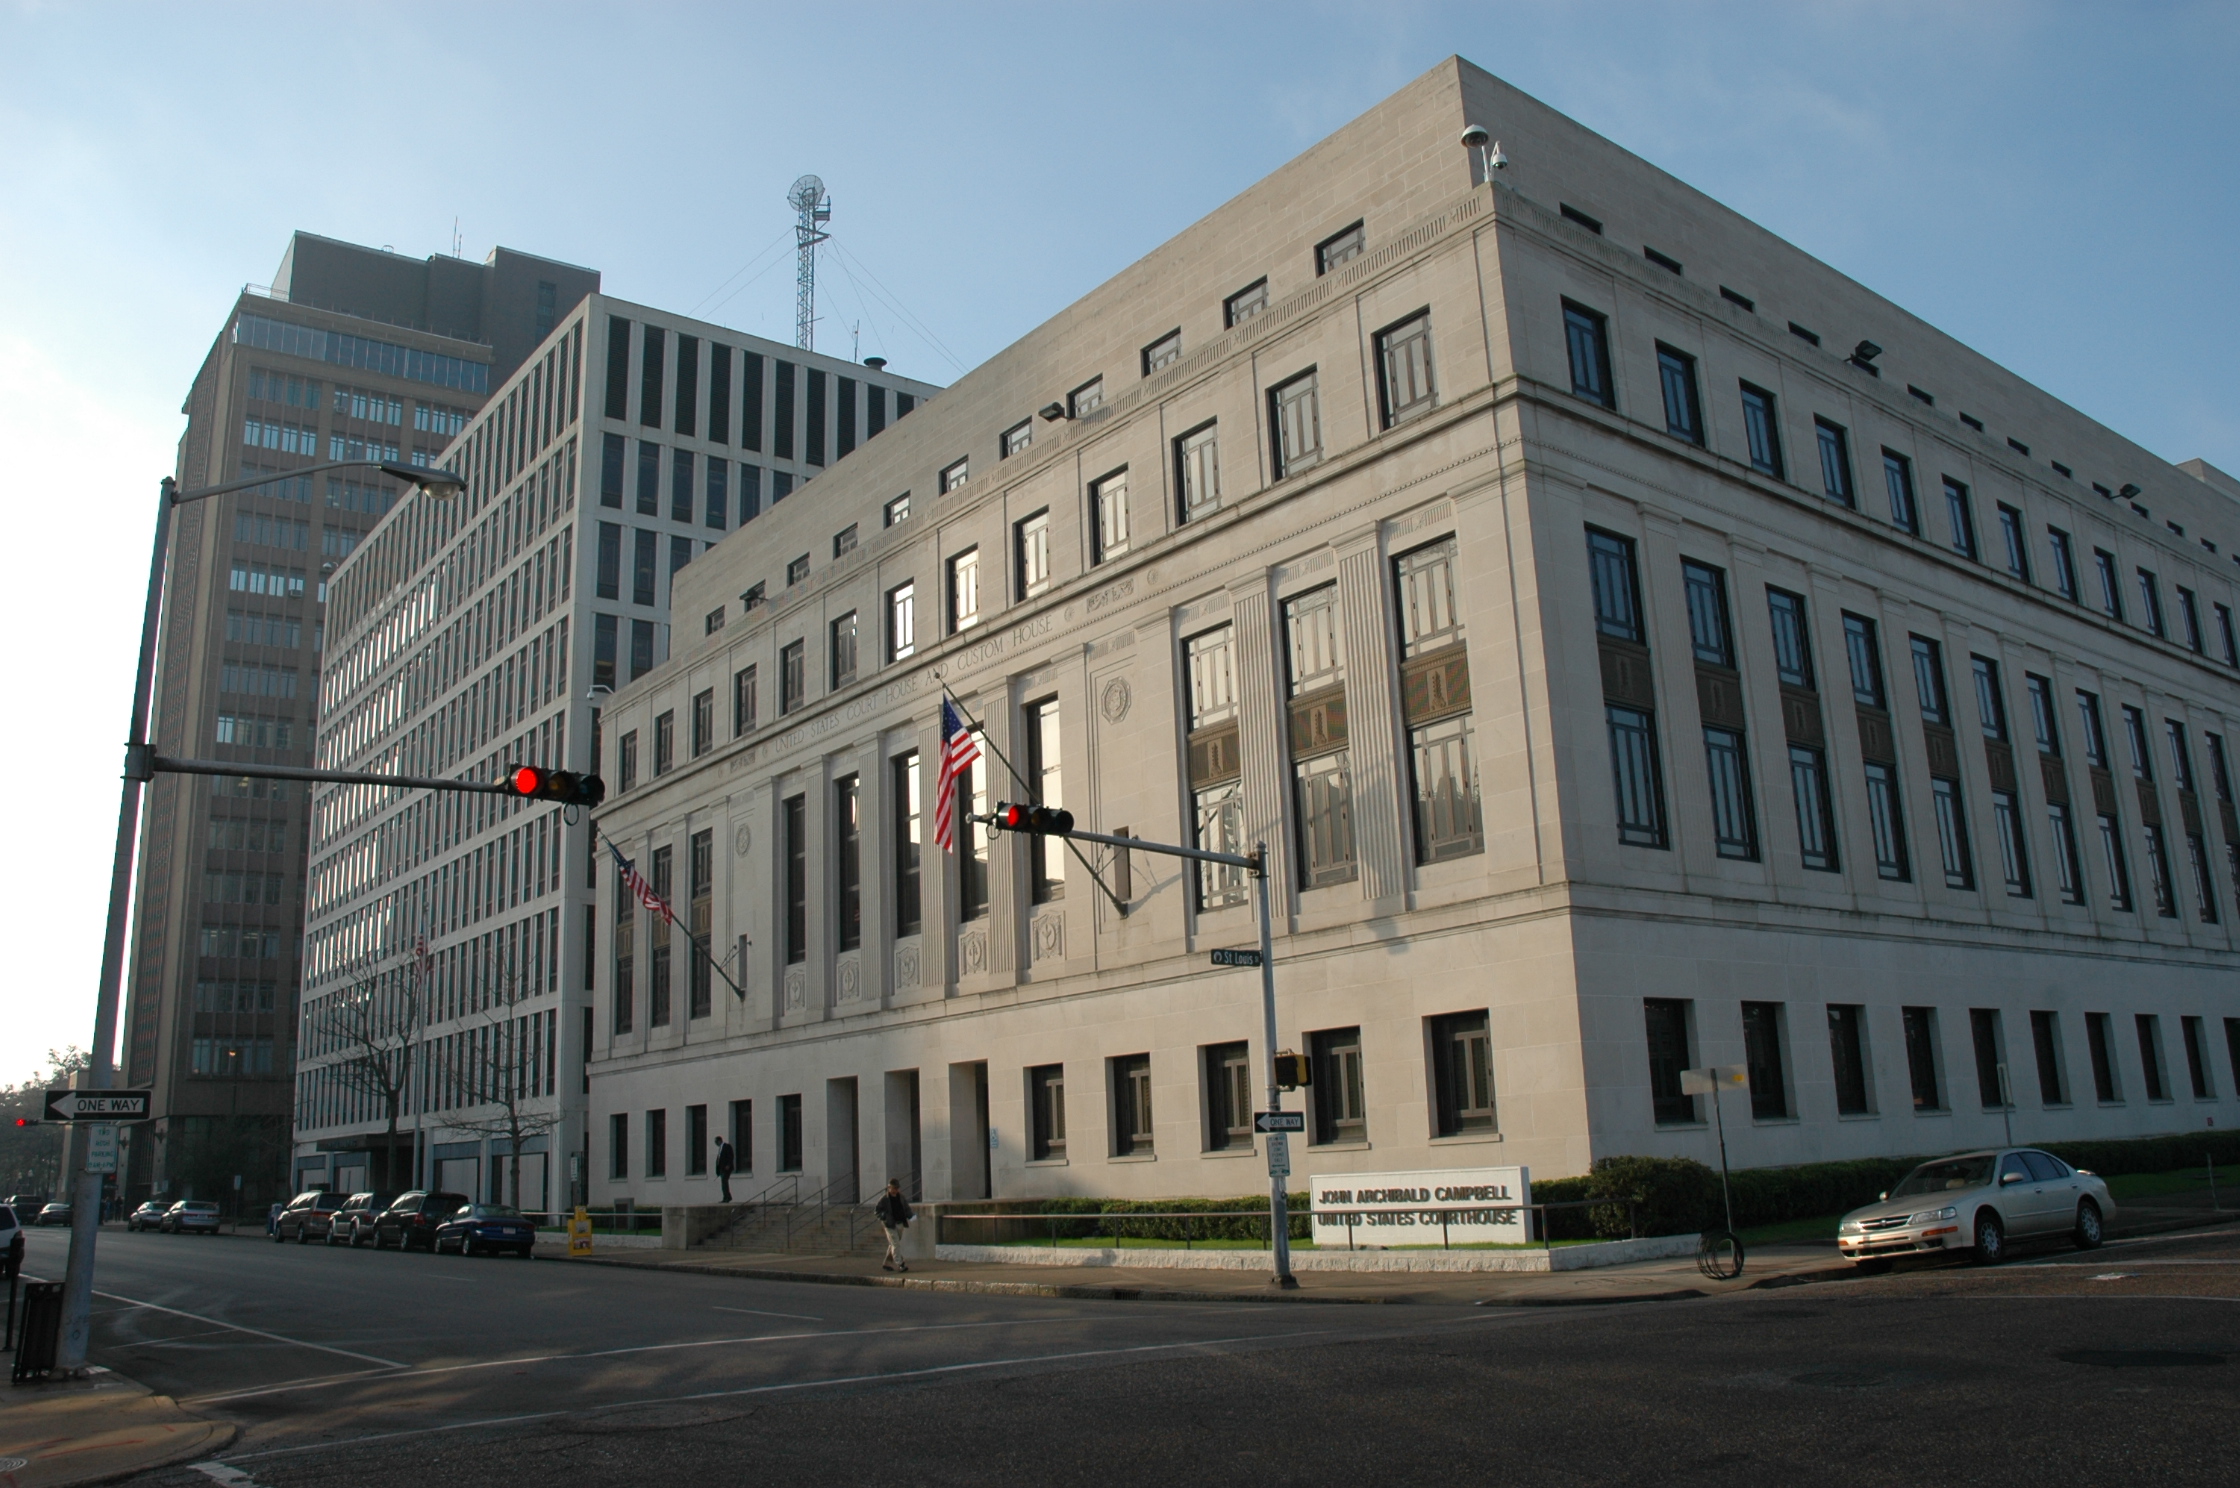 The Courthouse in Mobile, Alabama is a white, limestone building resting on a granite base, built in the relatively austere Neo-Classical Revival style.